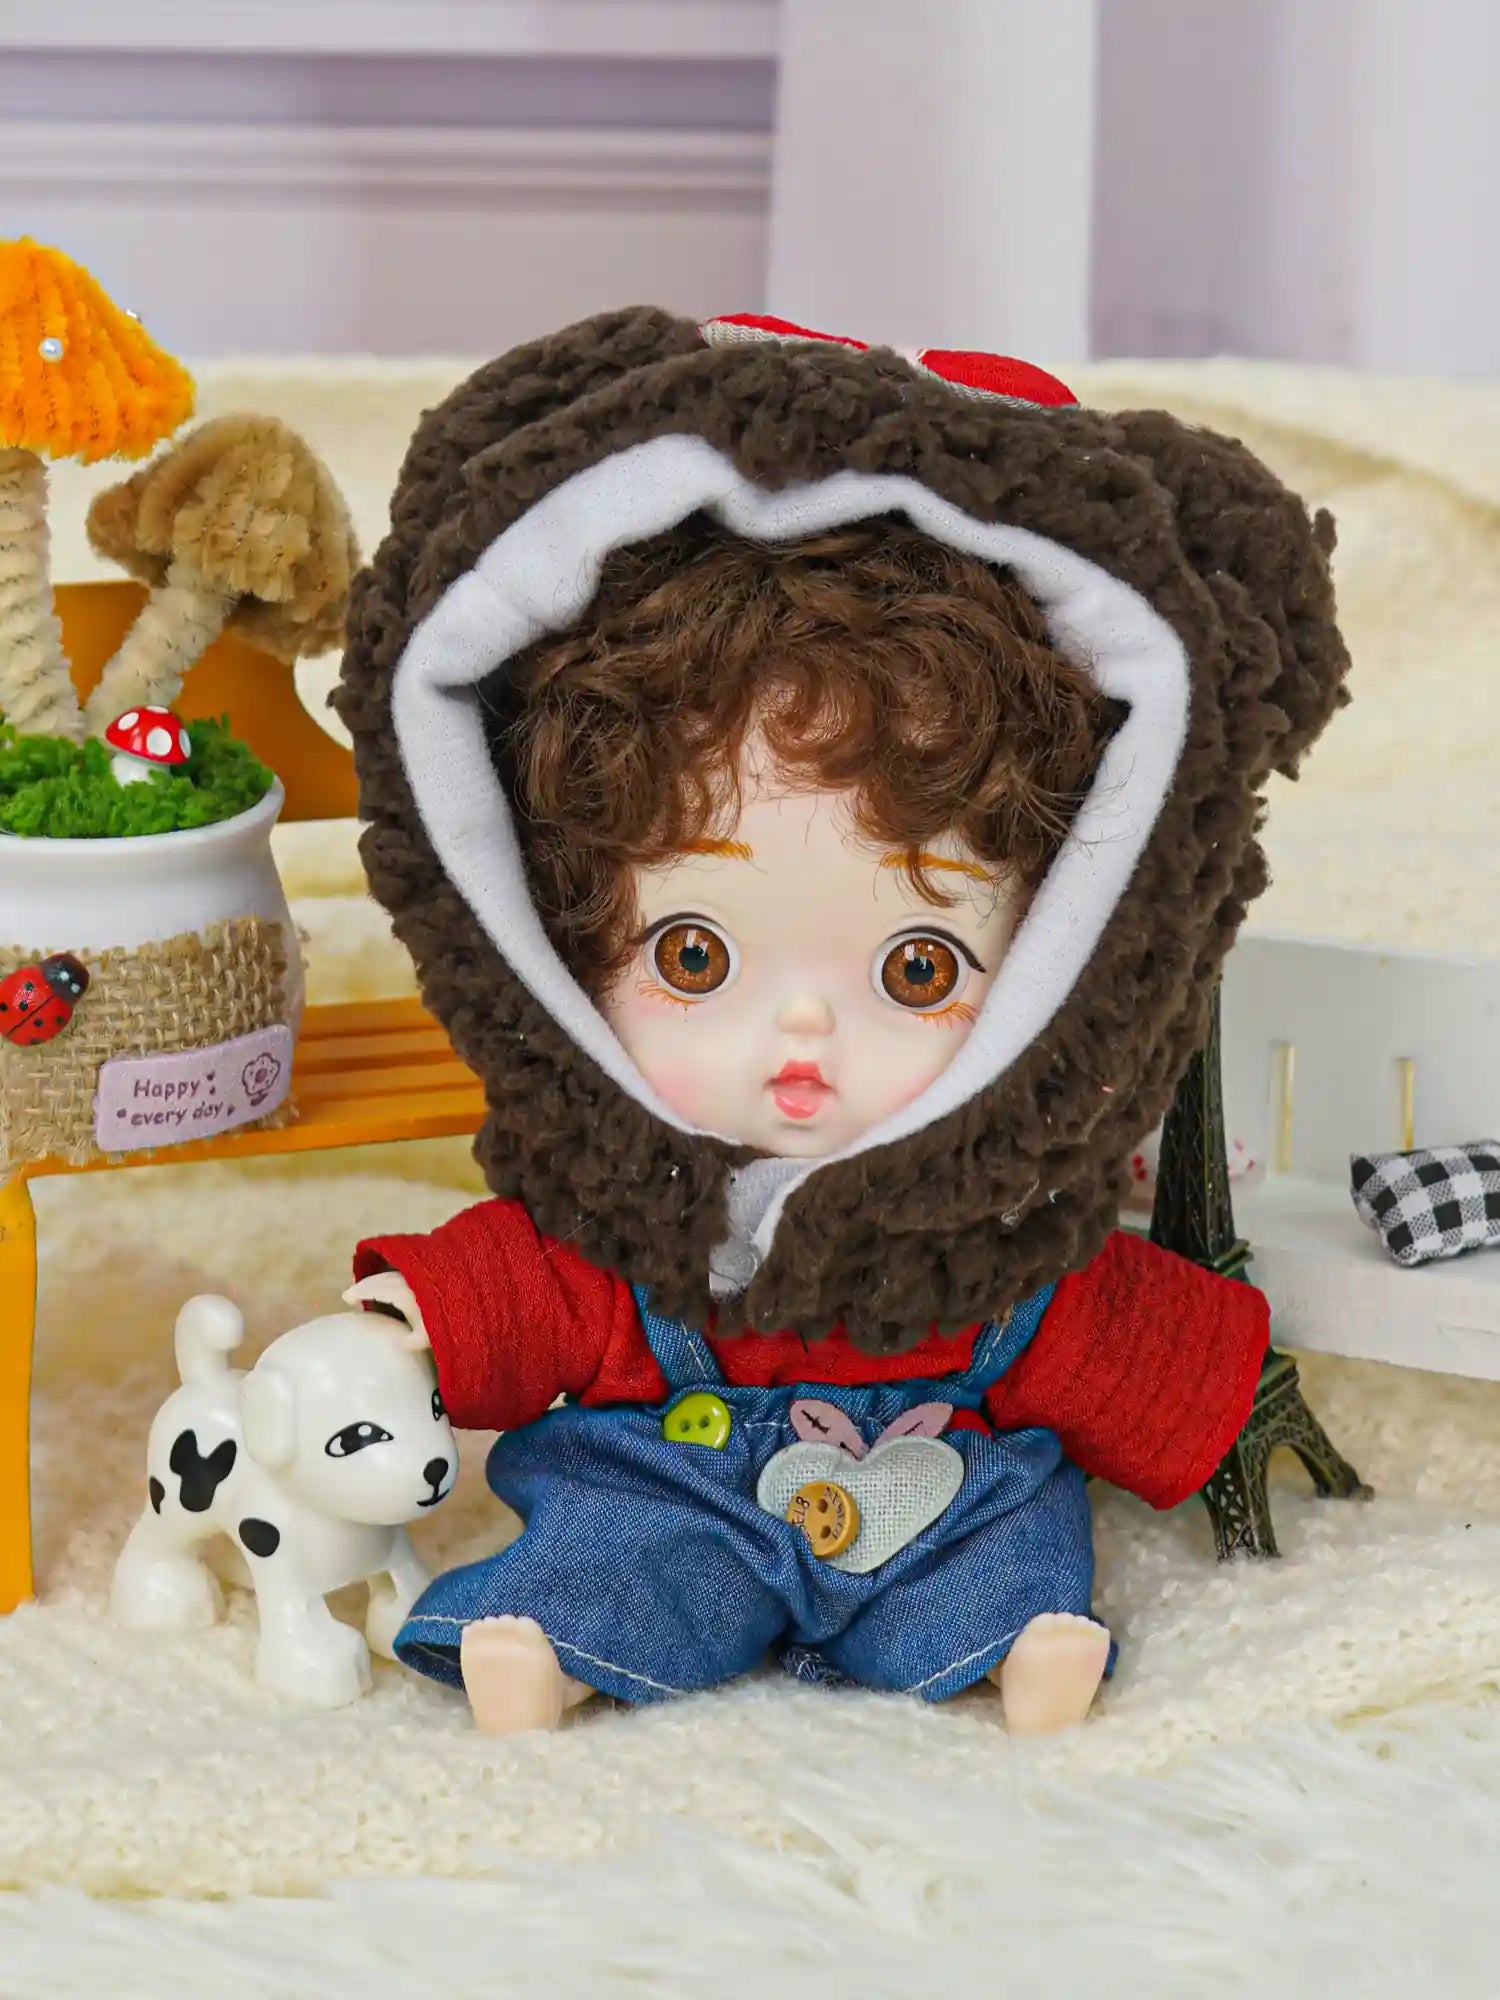 A charming doll with brown curls and a cuddly bear headpiece, flanked by a tiny Eiffel Tower and a toy canine.